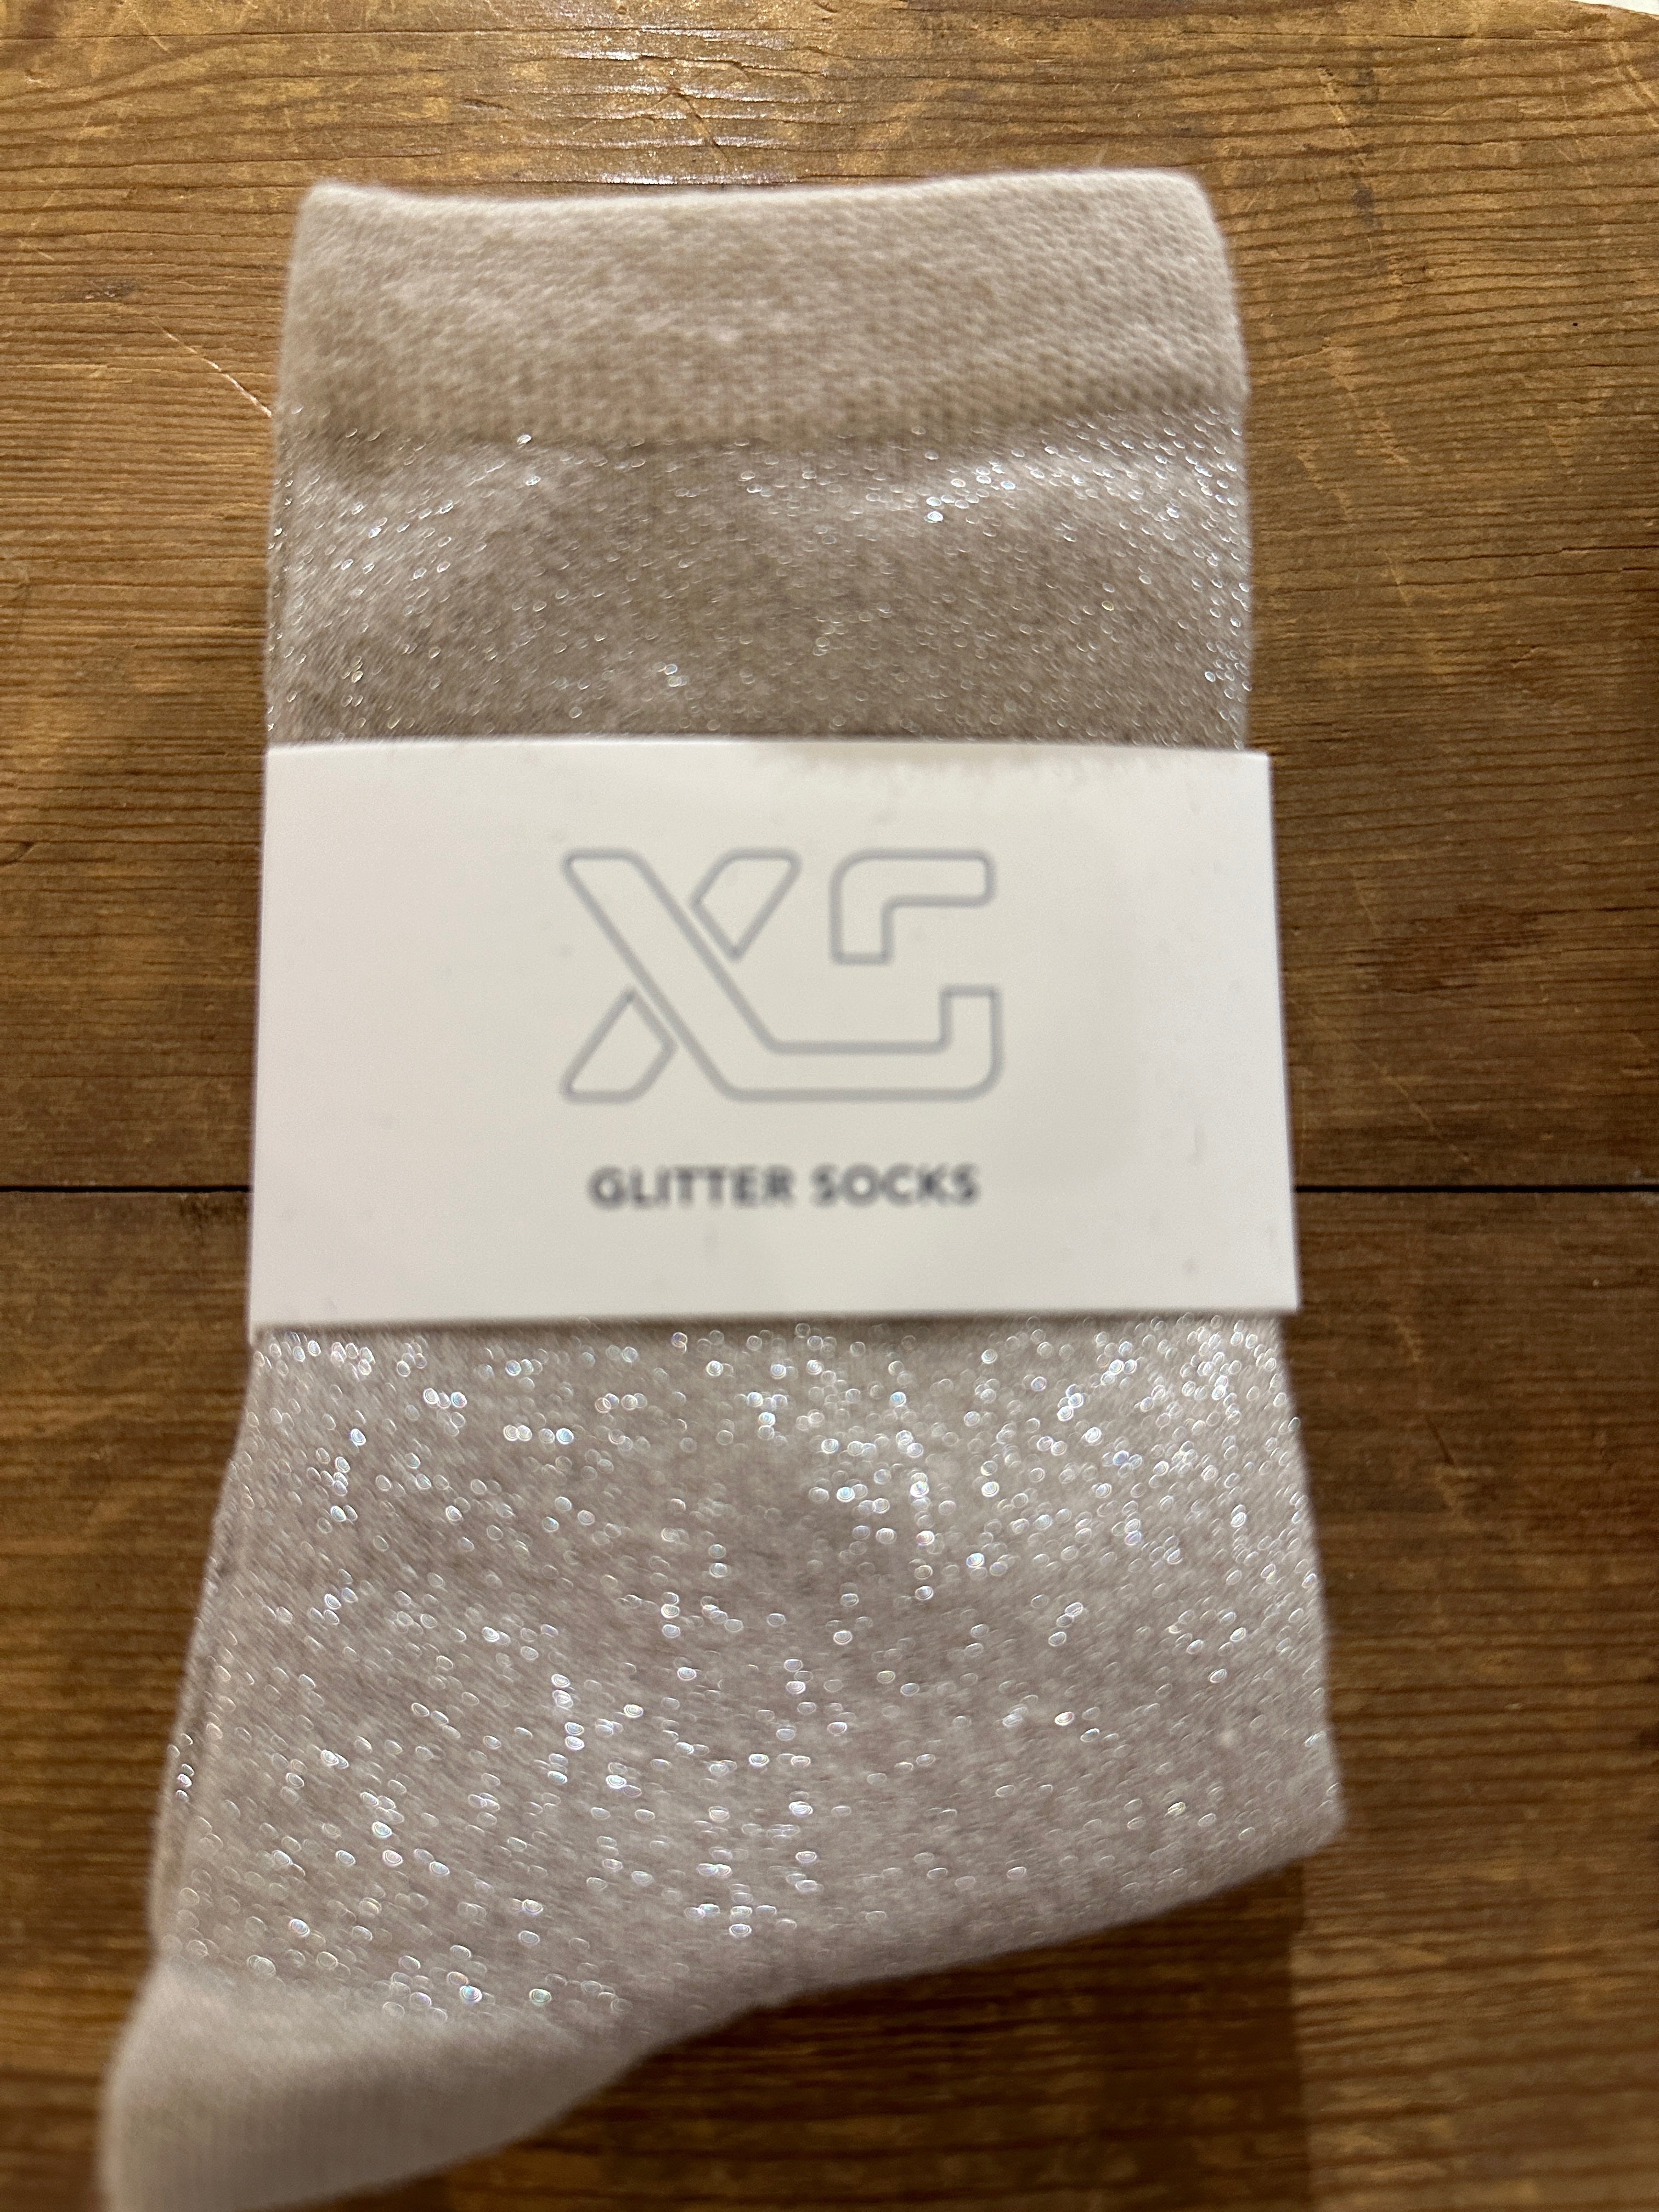 Glitter Socks - Out of the Blue